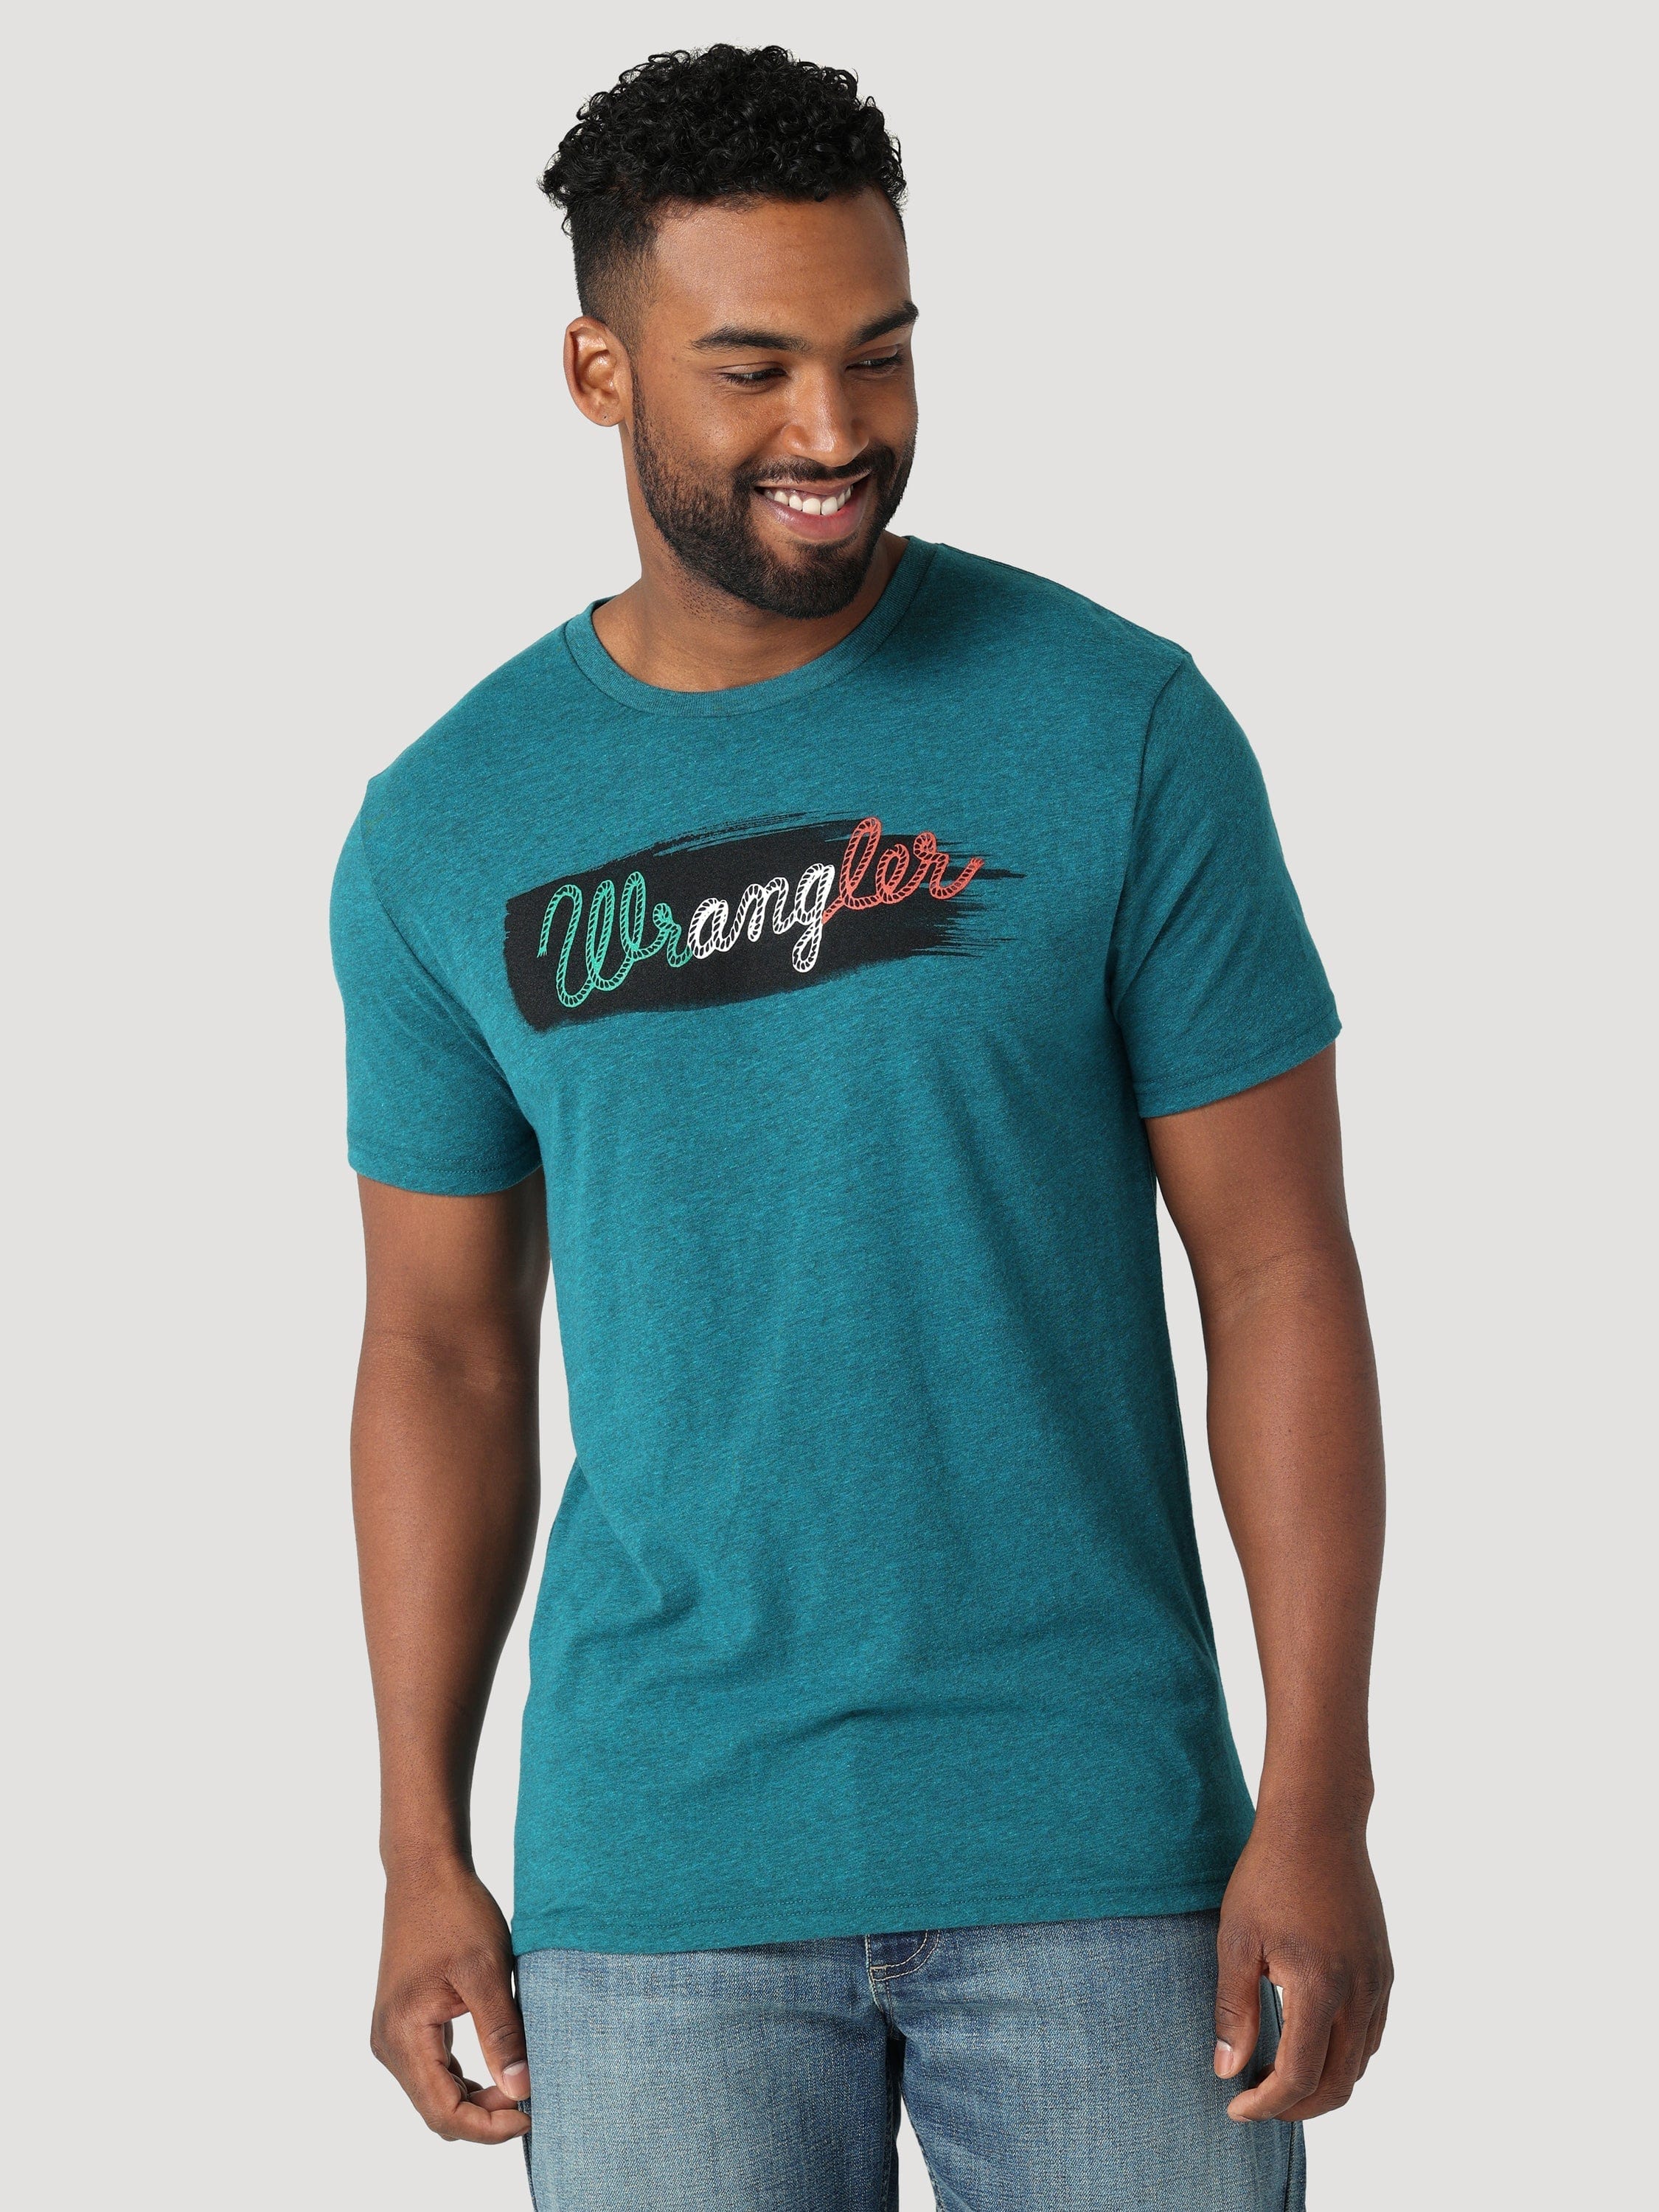 Bunke af Labe Tomhed Wrangler Men's Green White Red Logo Cyan Pepper Heather T-Shirt 112315 -  Russell's Western Wear, Inc.